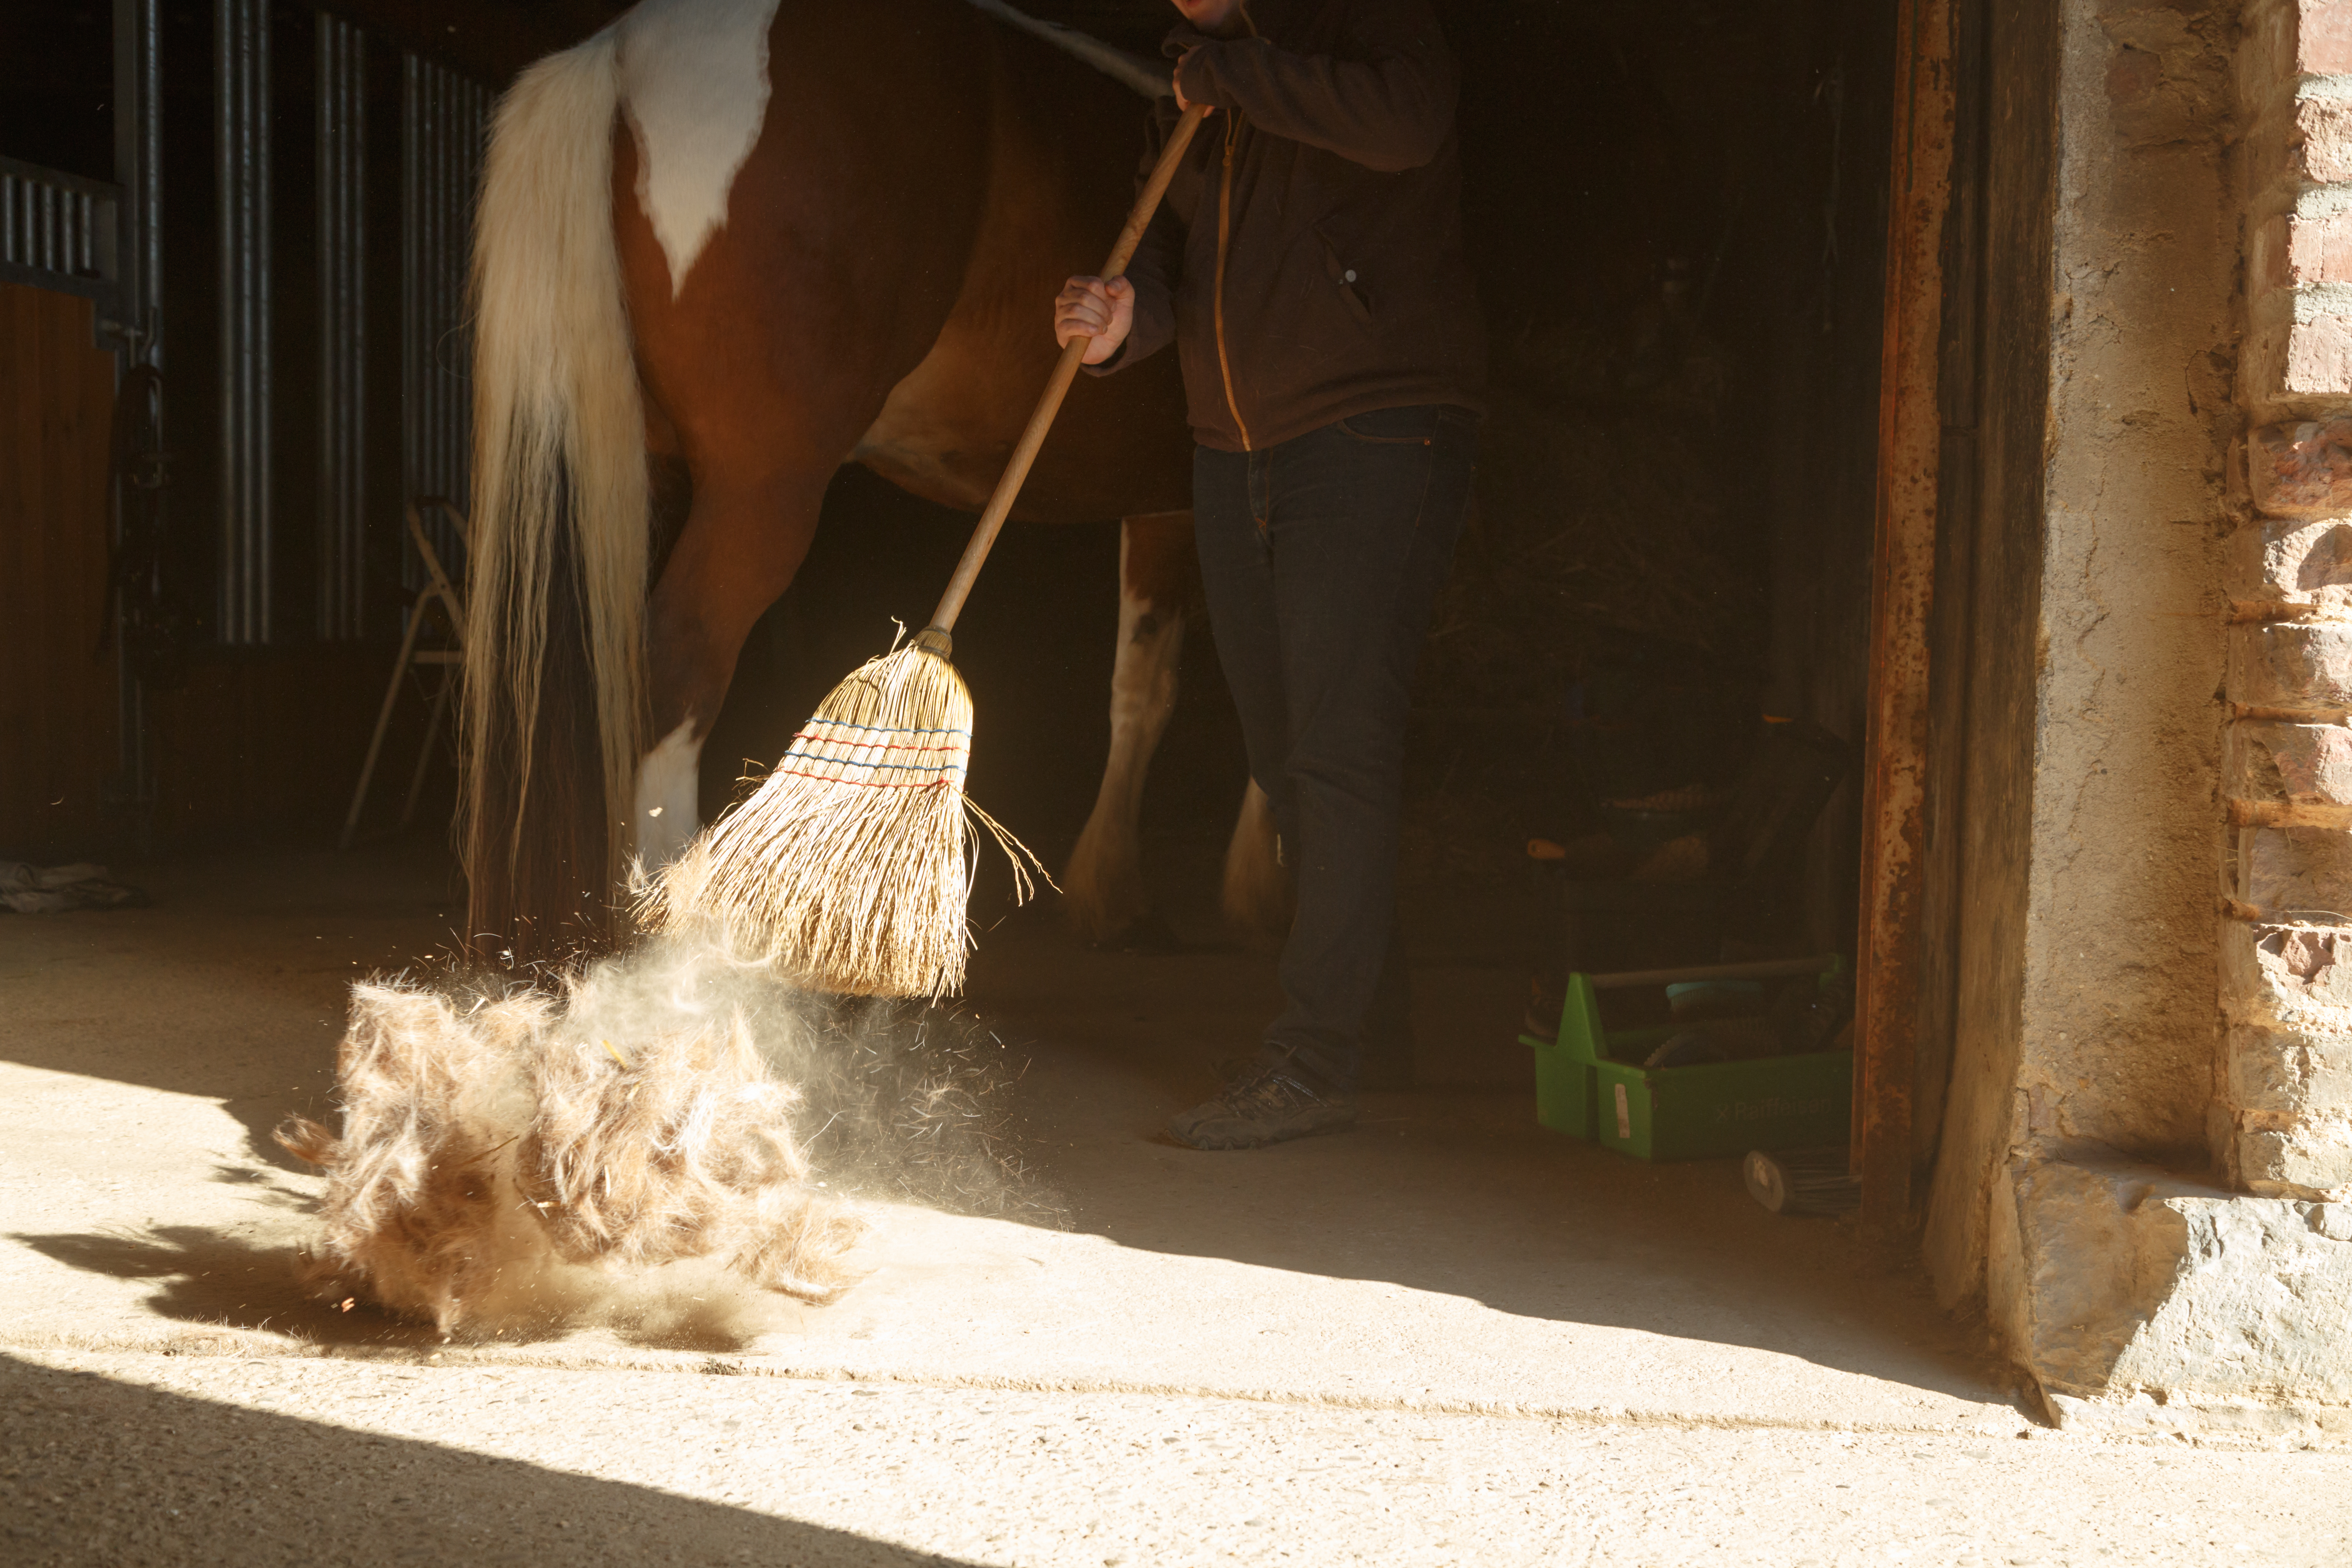 A person sweeping hair out of a barn with a horse visible in the background